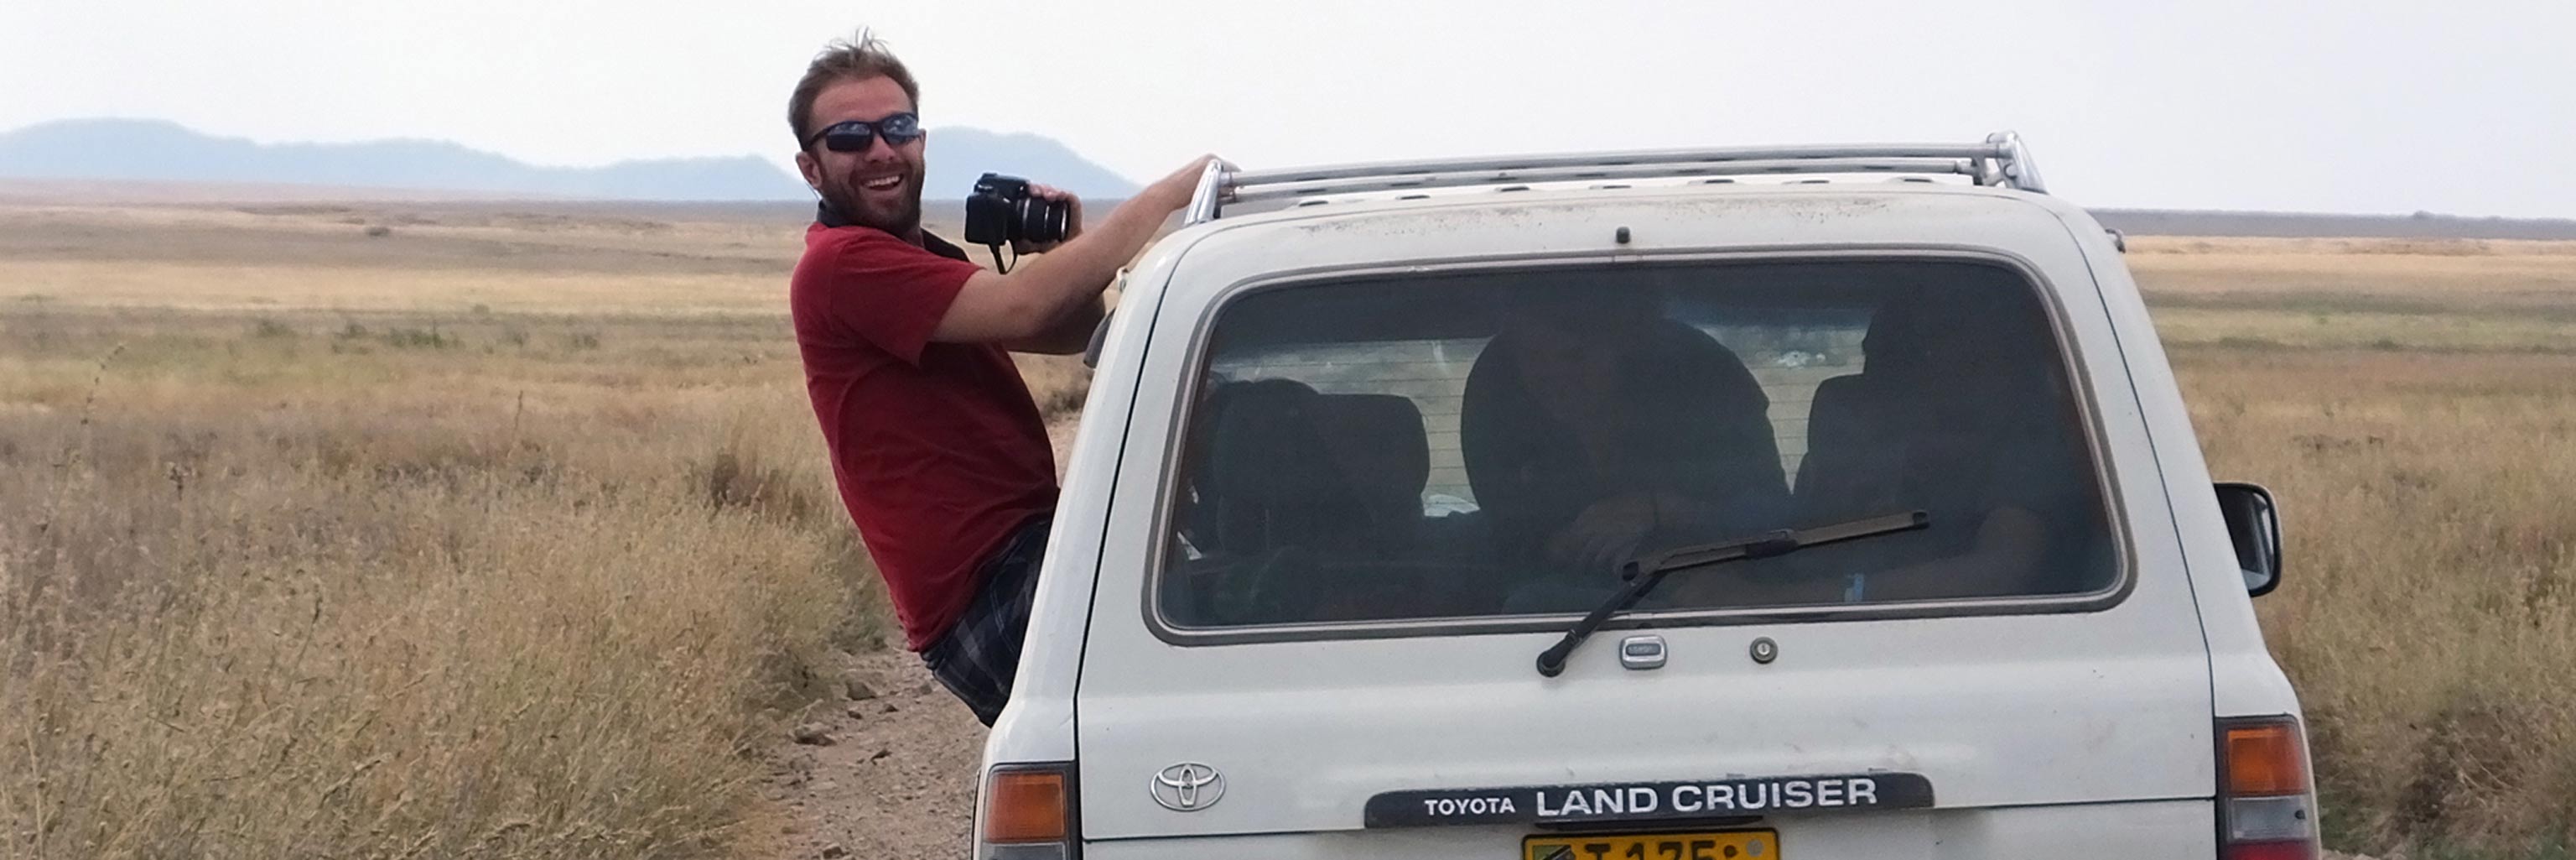 Student leaning out of a vehicle to take photos for field research